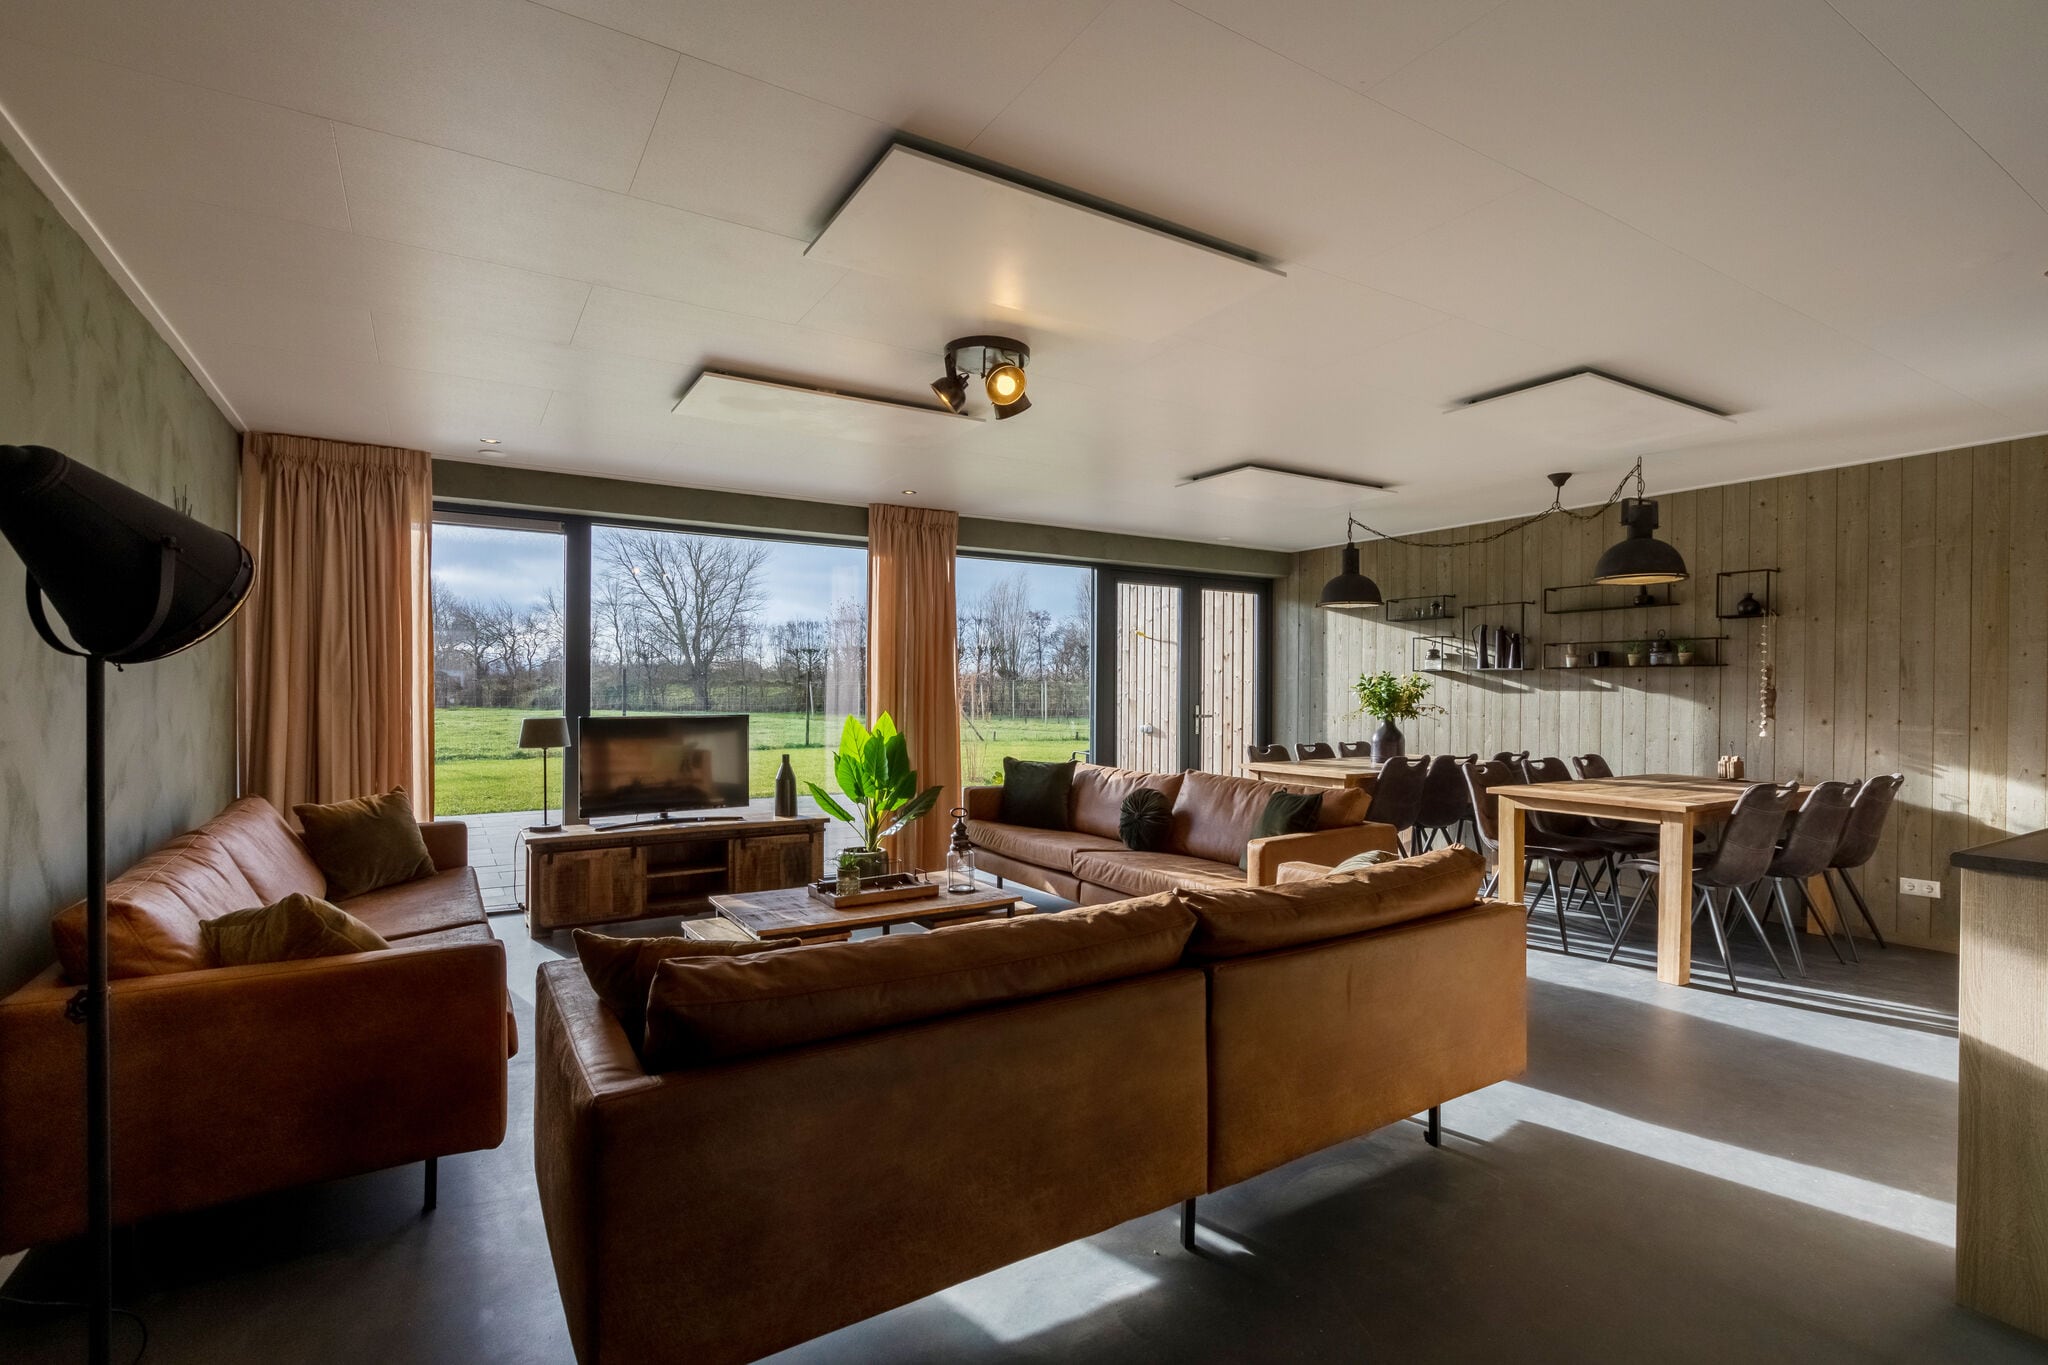 Holiday home in Vrouwenpolder near beach